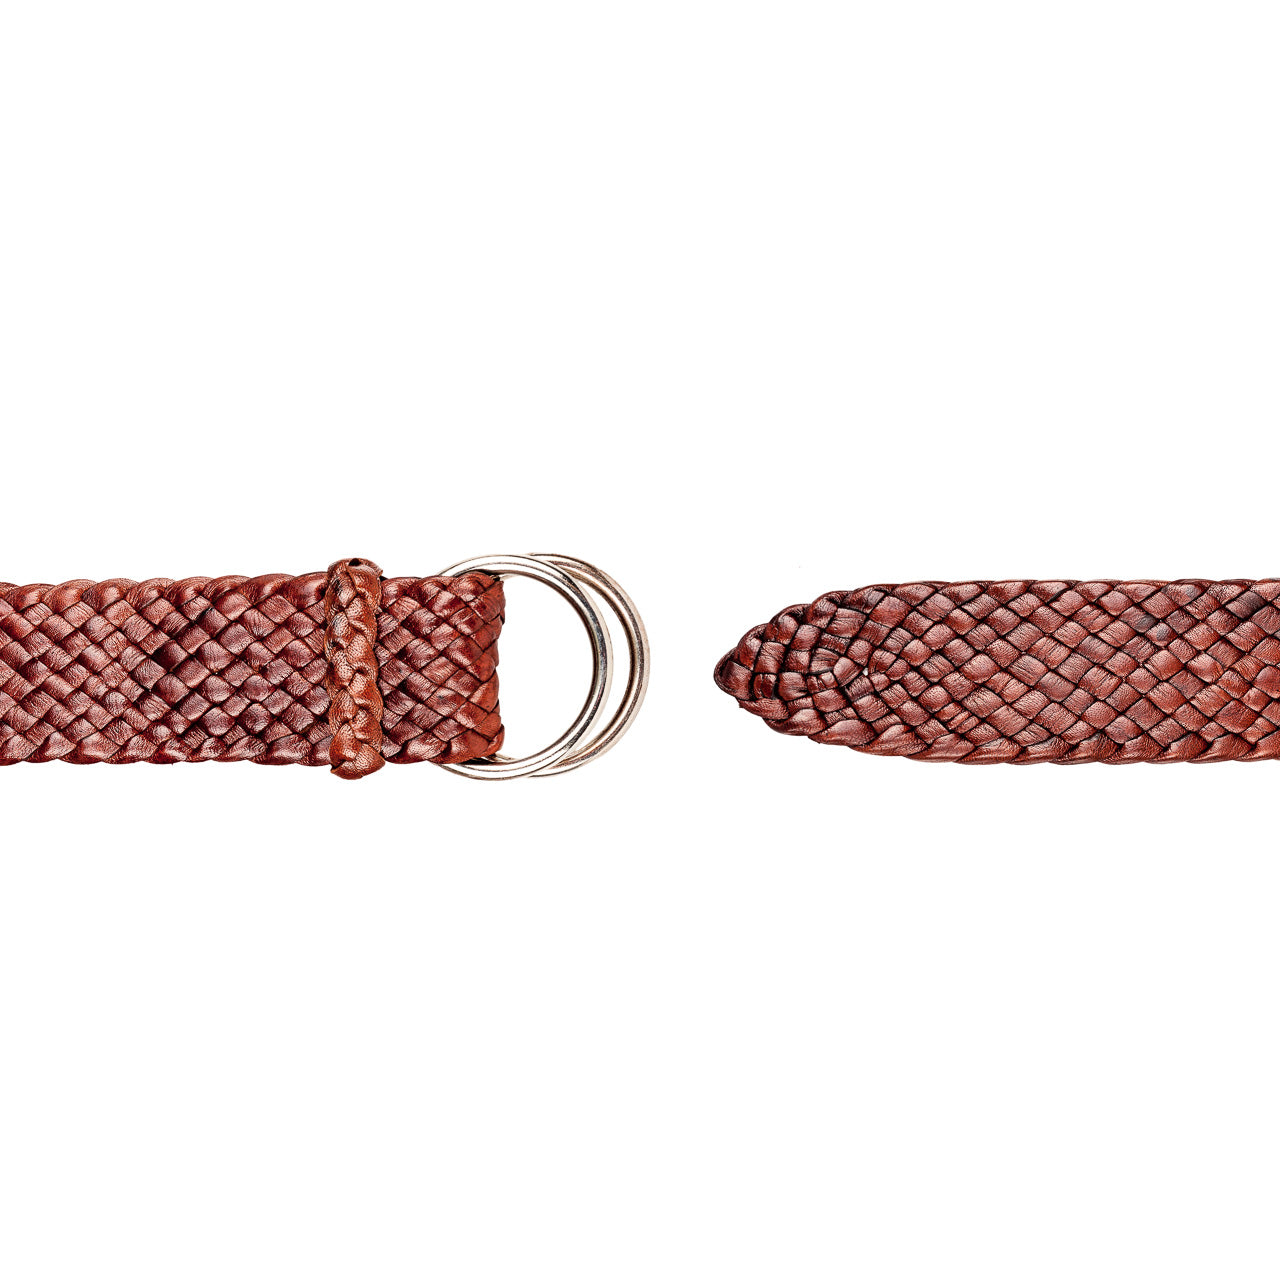 Premium Men's Leather Belt: Handcrafted in Australia from Full Grain Leather with ring buckle on white background.